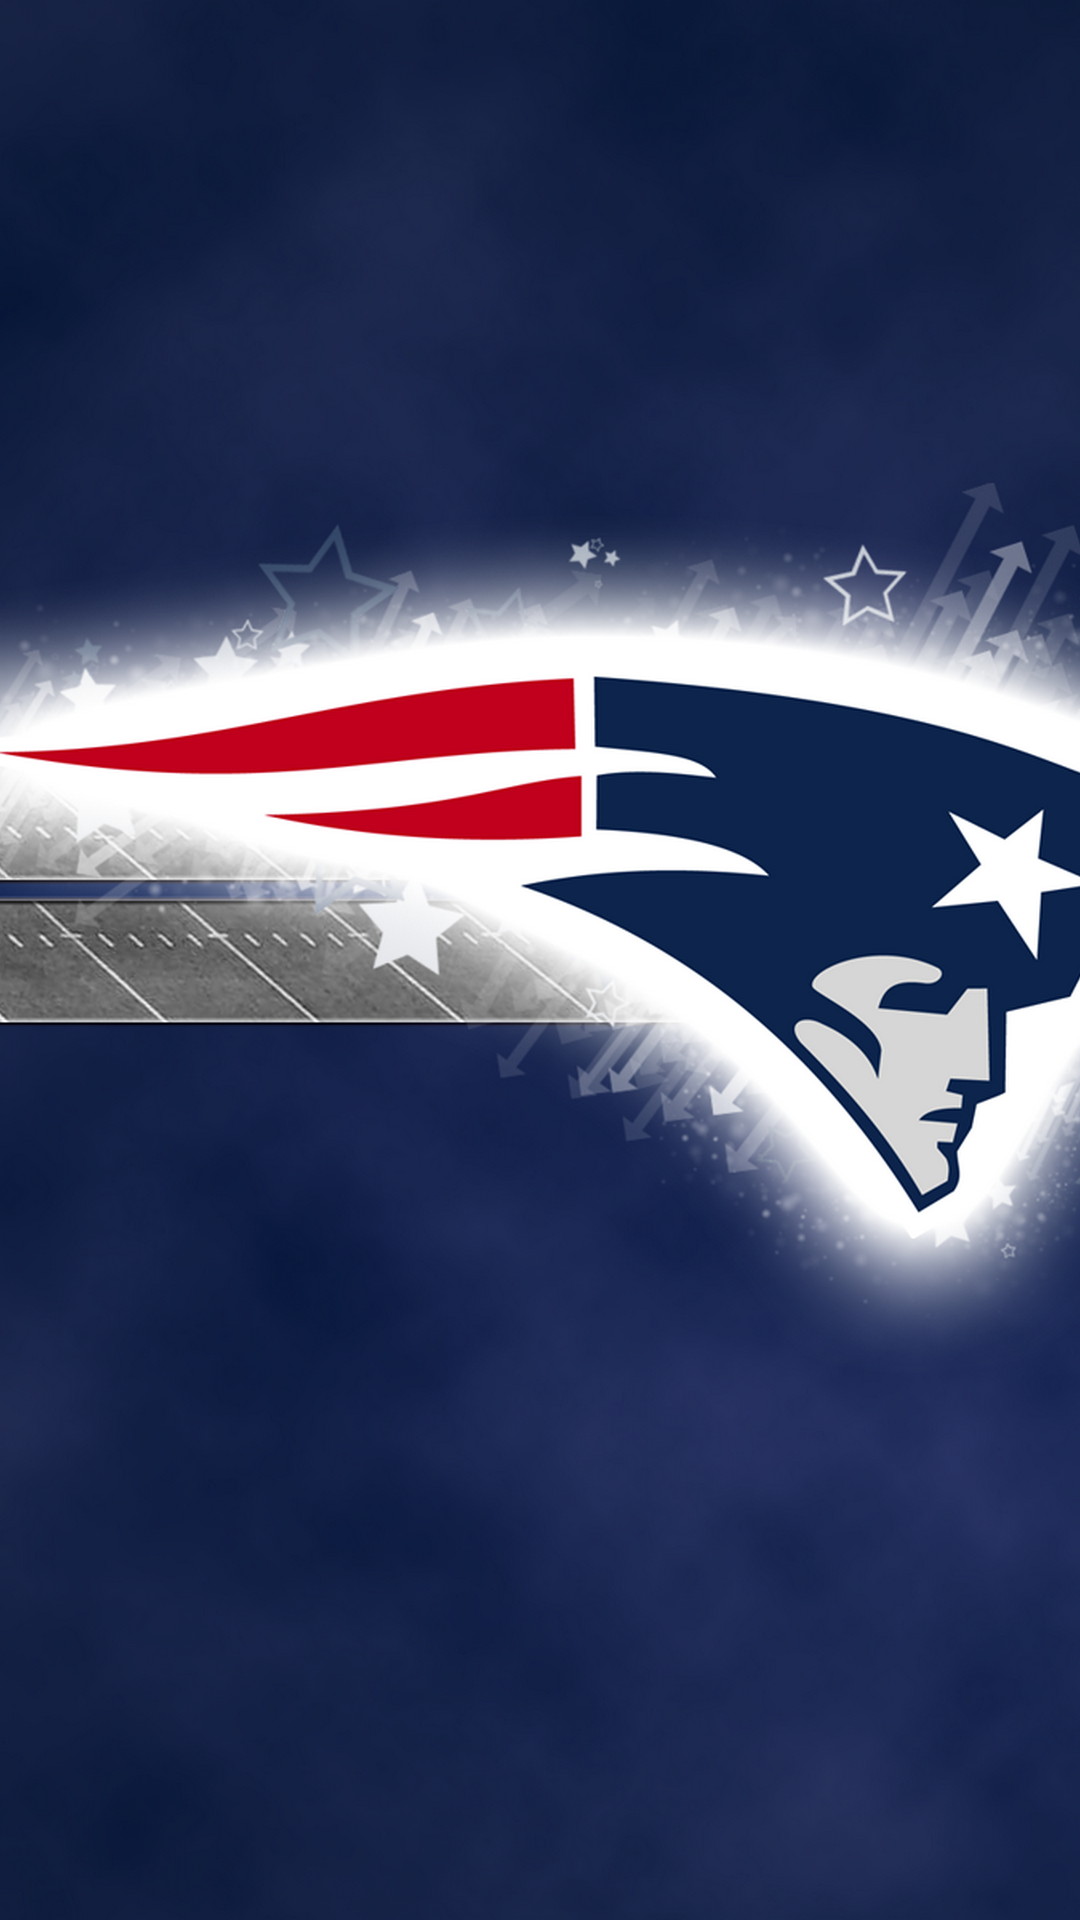 NE Patriots Wallpaper For Mobile with high-resolution 1080x1920 pixel. You can use and set as wallpaper for Notebook Screensavers, Mac Wallpapers, Mobile Home Screen, iPhone or Android Phones Lock Screen